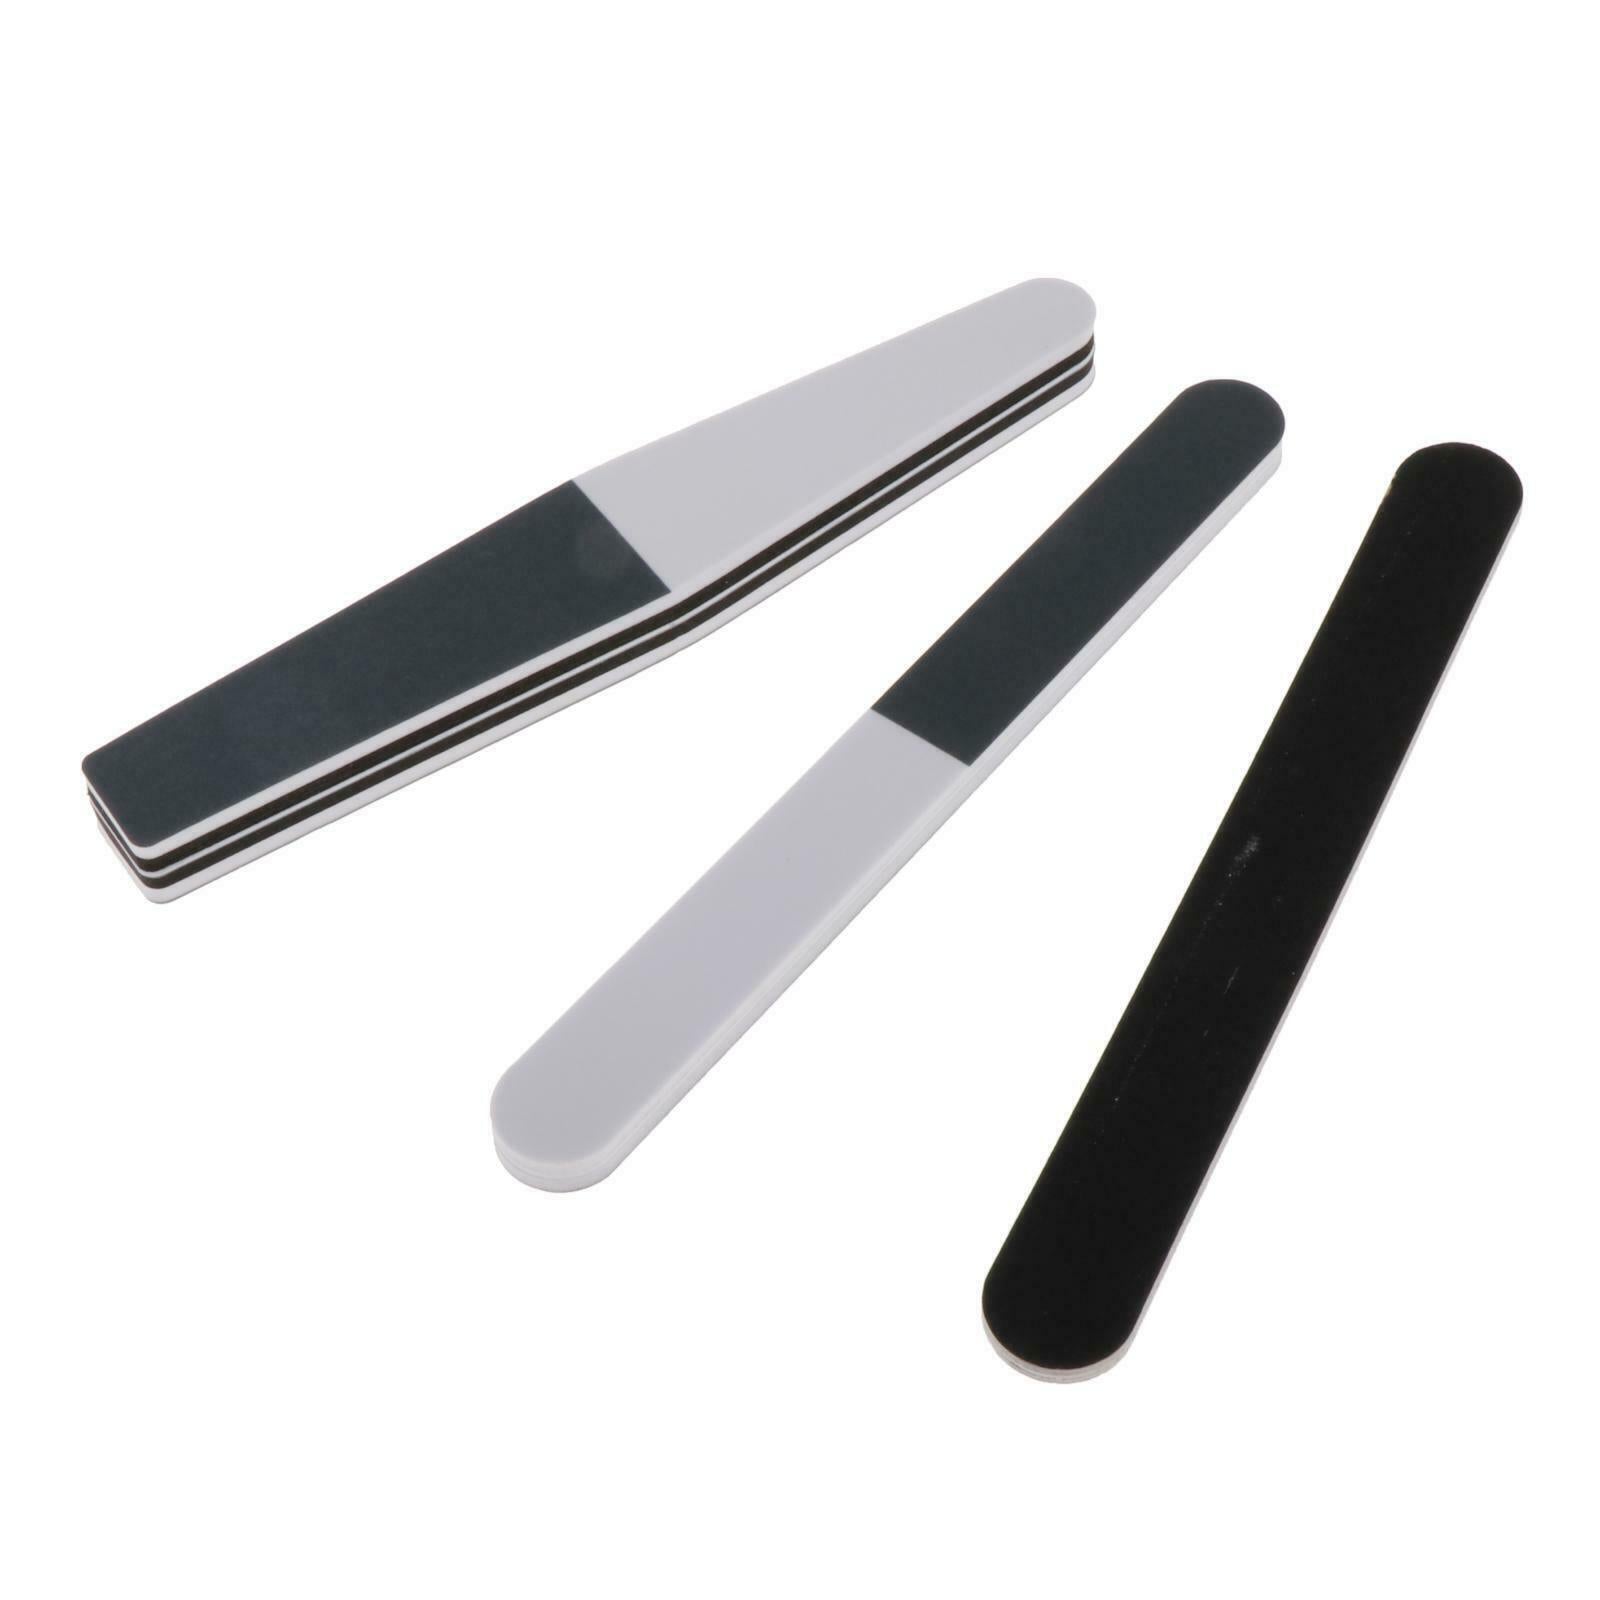 5 Shapes Double Side Nail Files Grinding Buffer Emery Board Modelling Tools